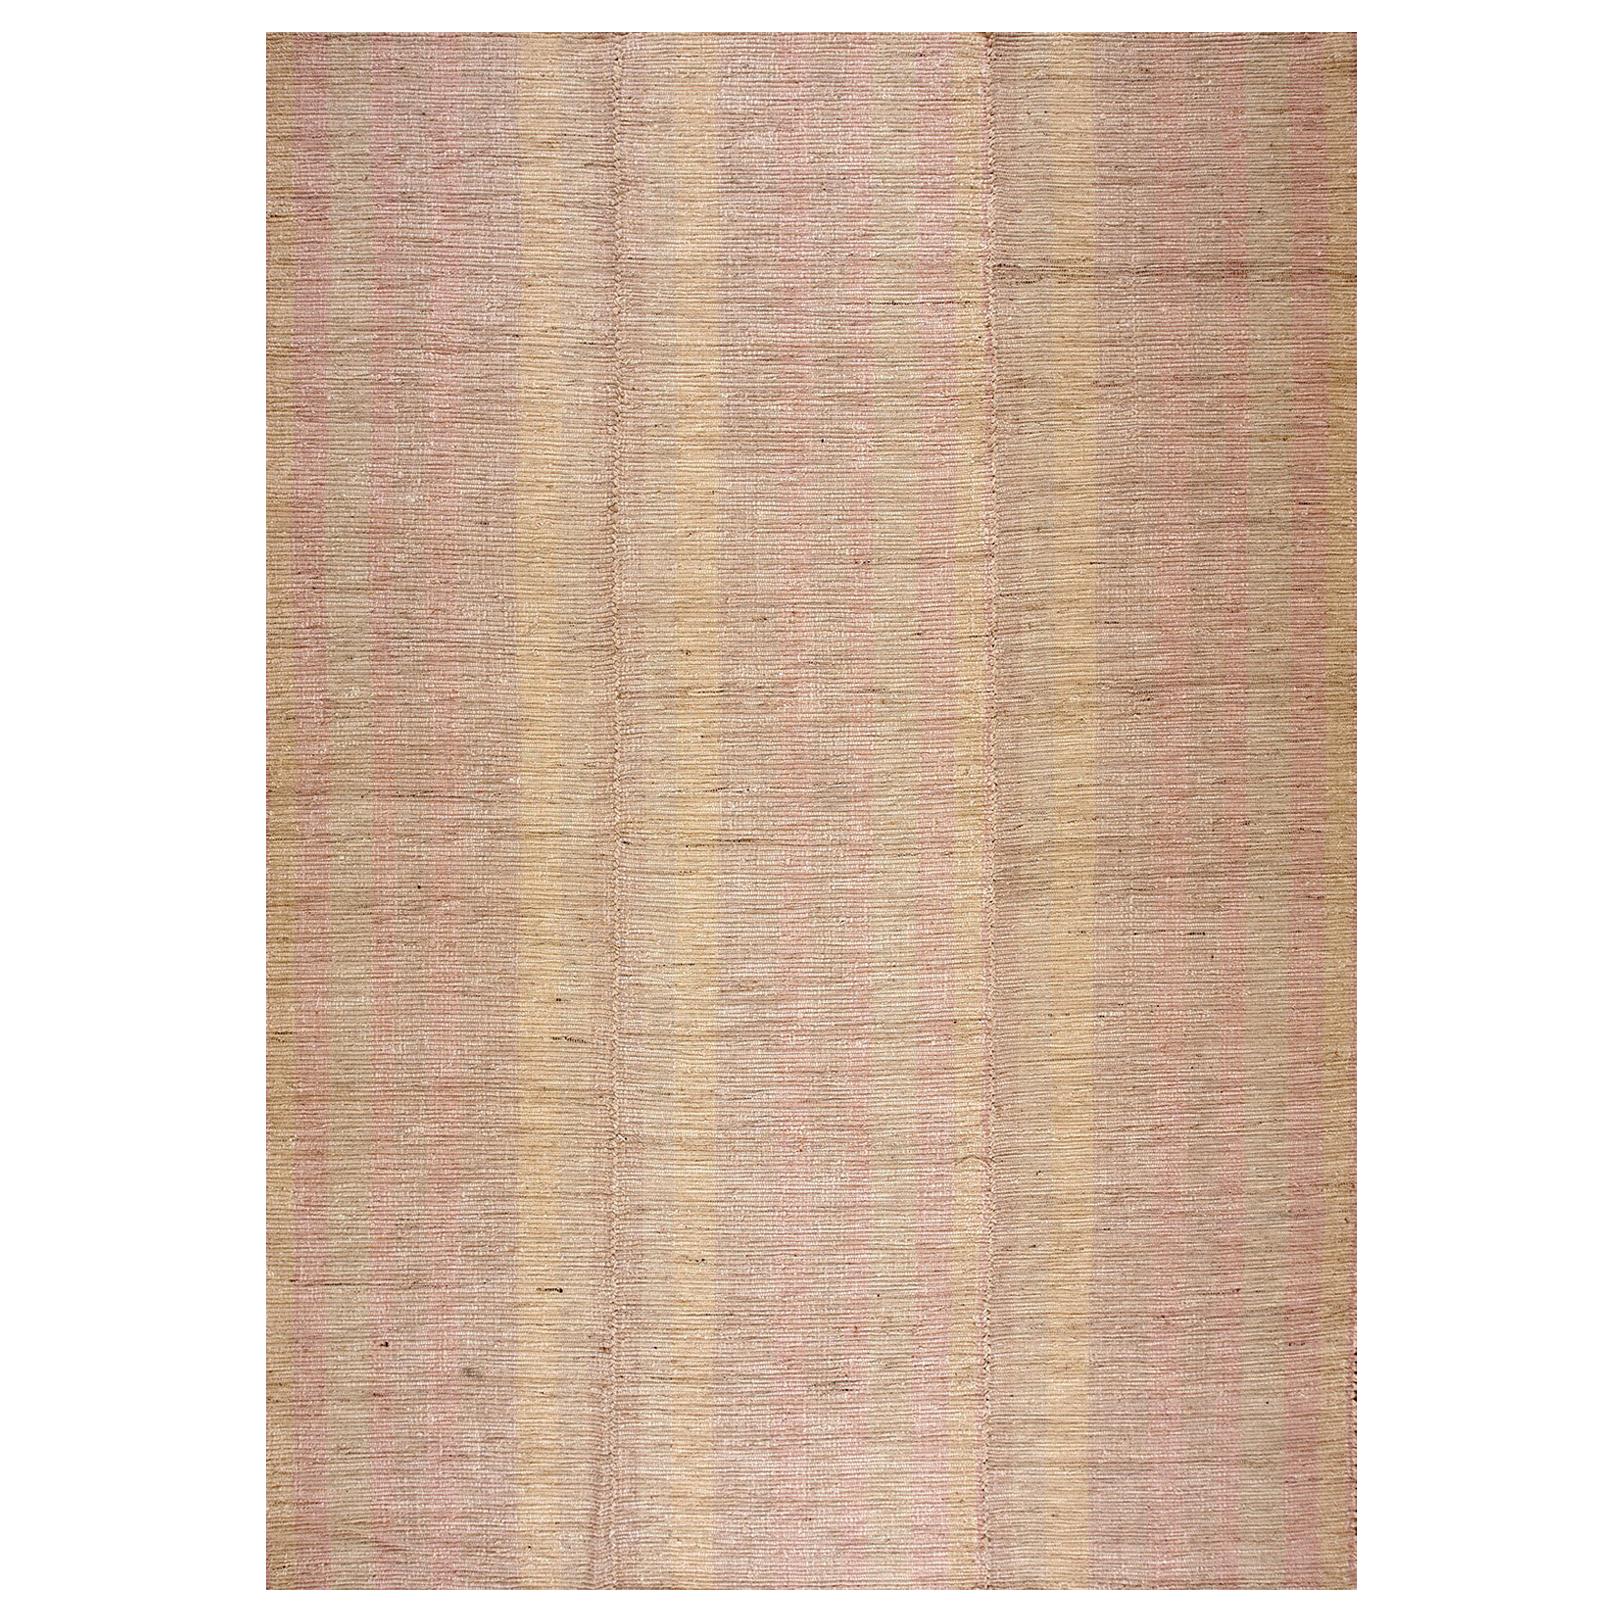 Contemporary Handwoven Wool Shaker Style Flat Weave Carpet 9' 3" x 13' 0" For Sale